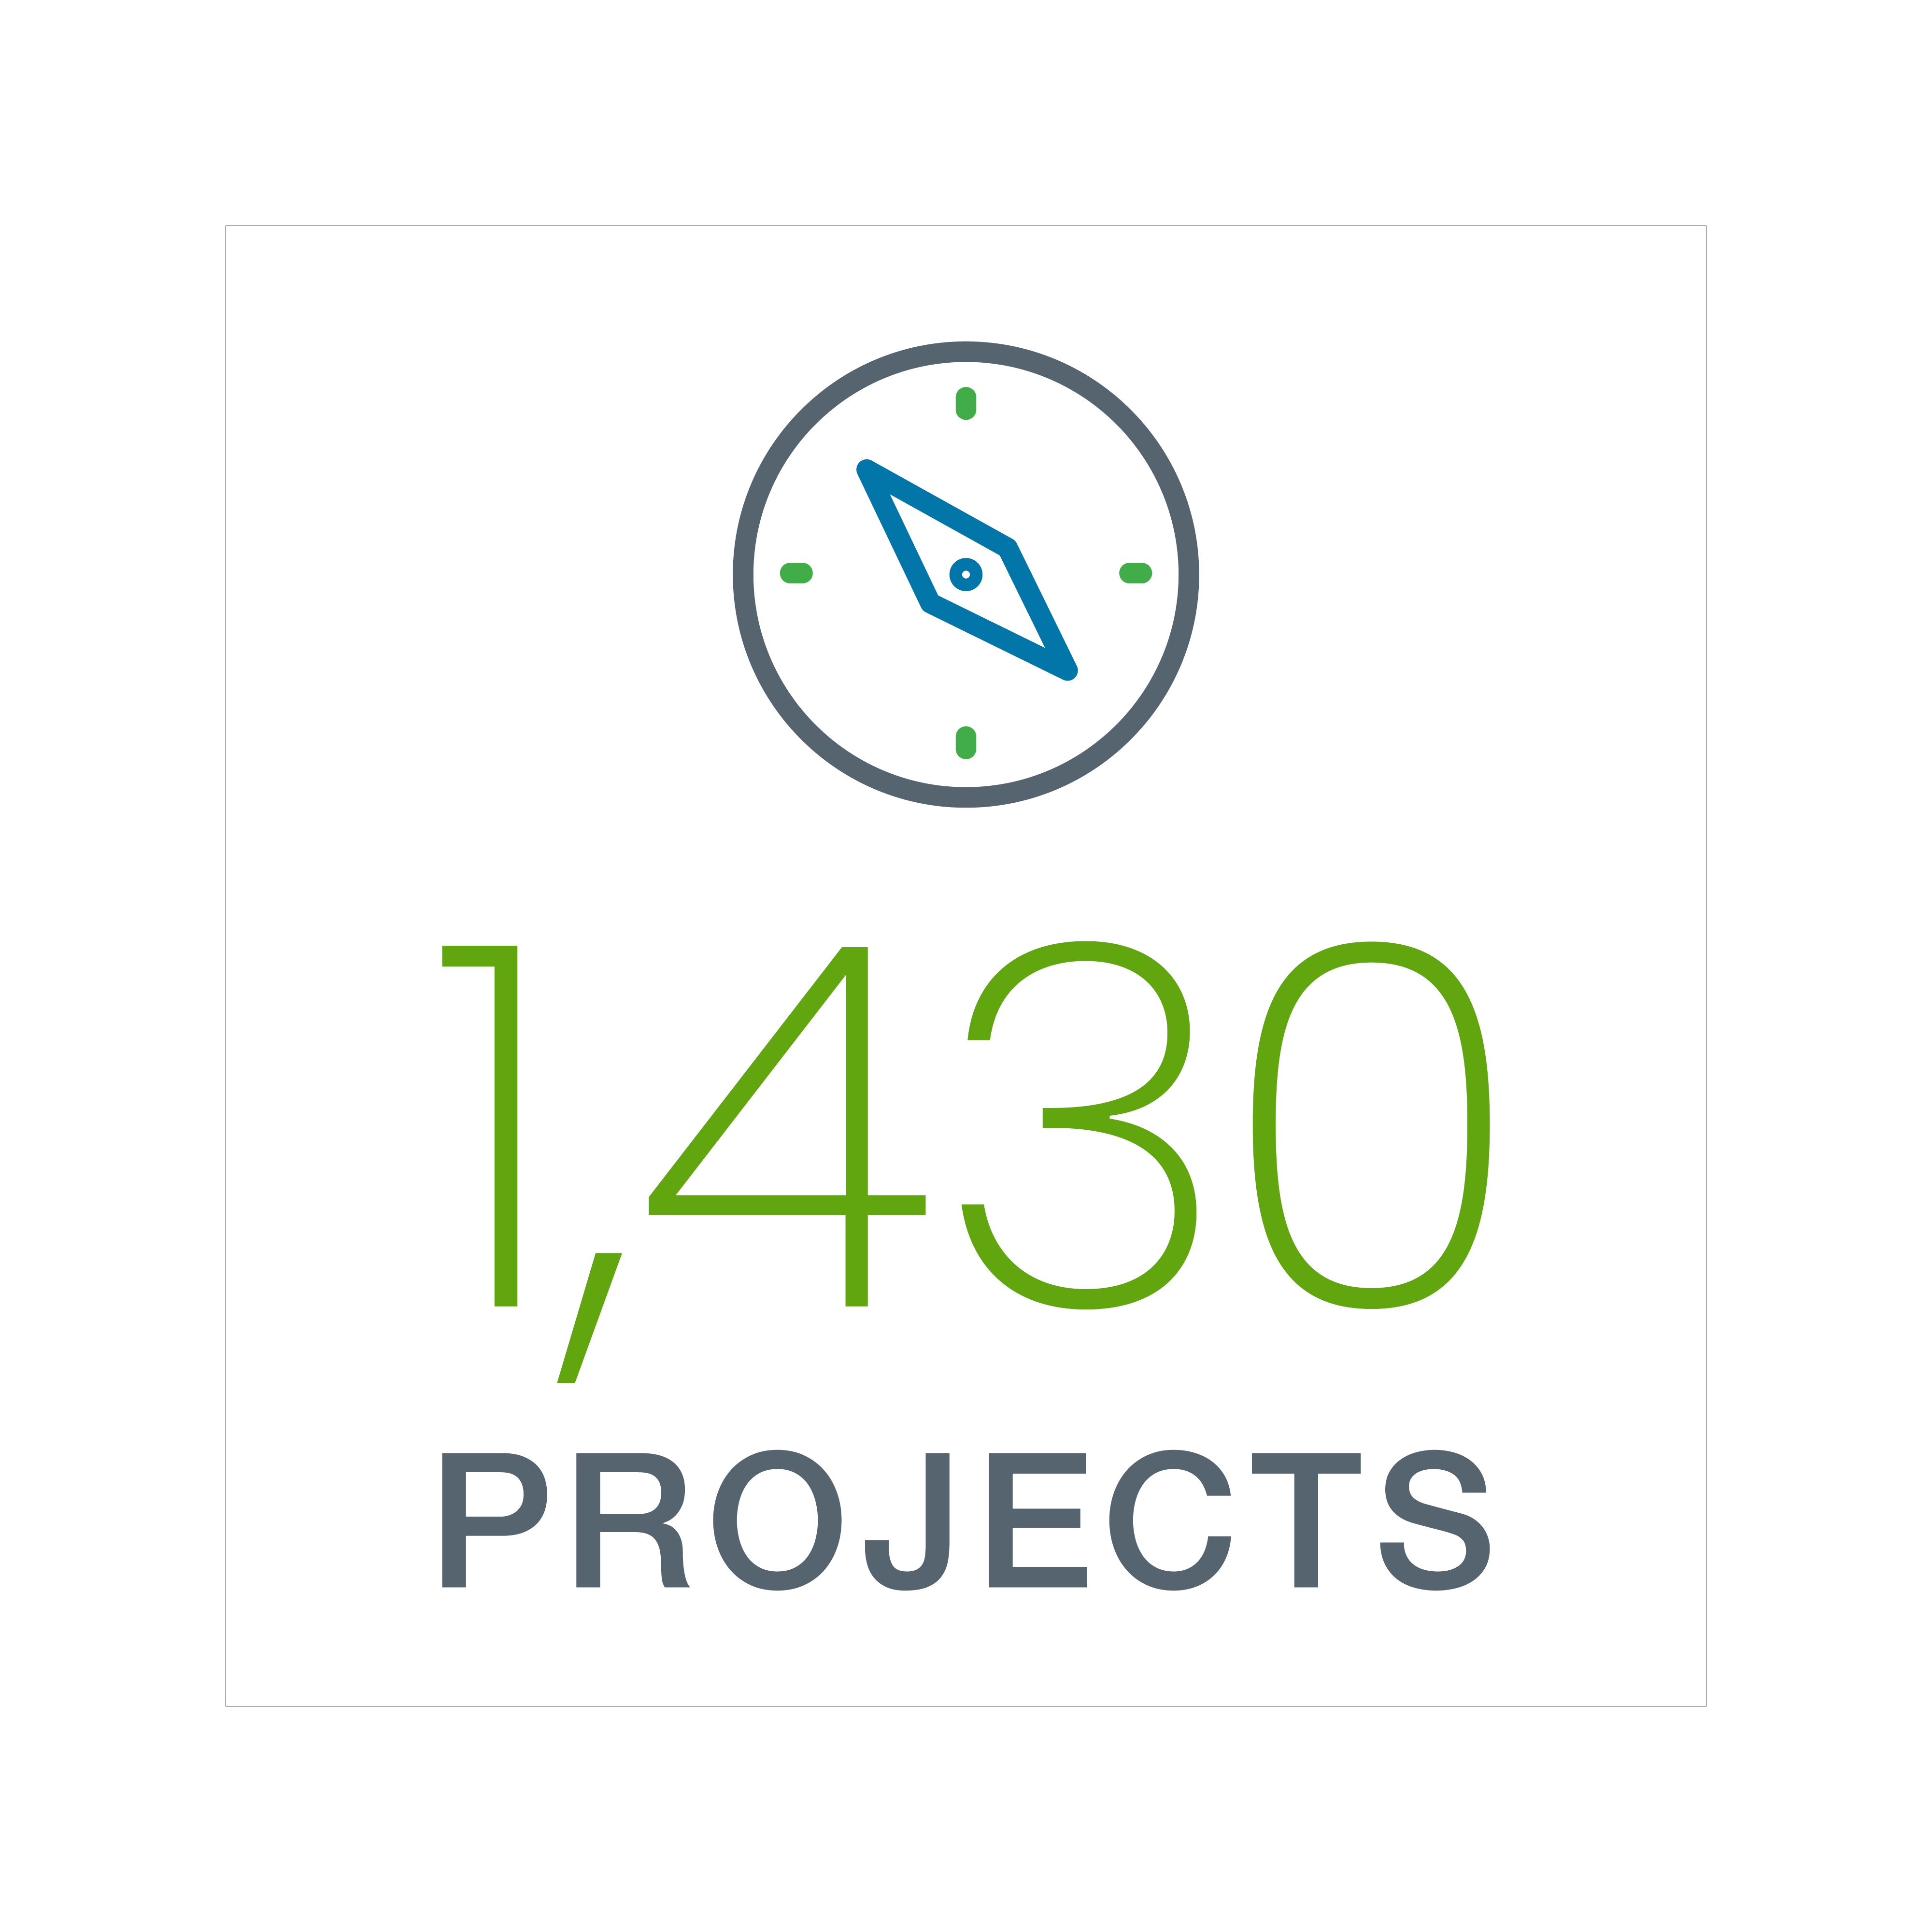 1,430 Projects